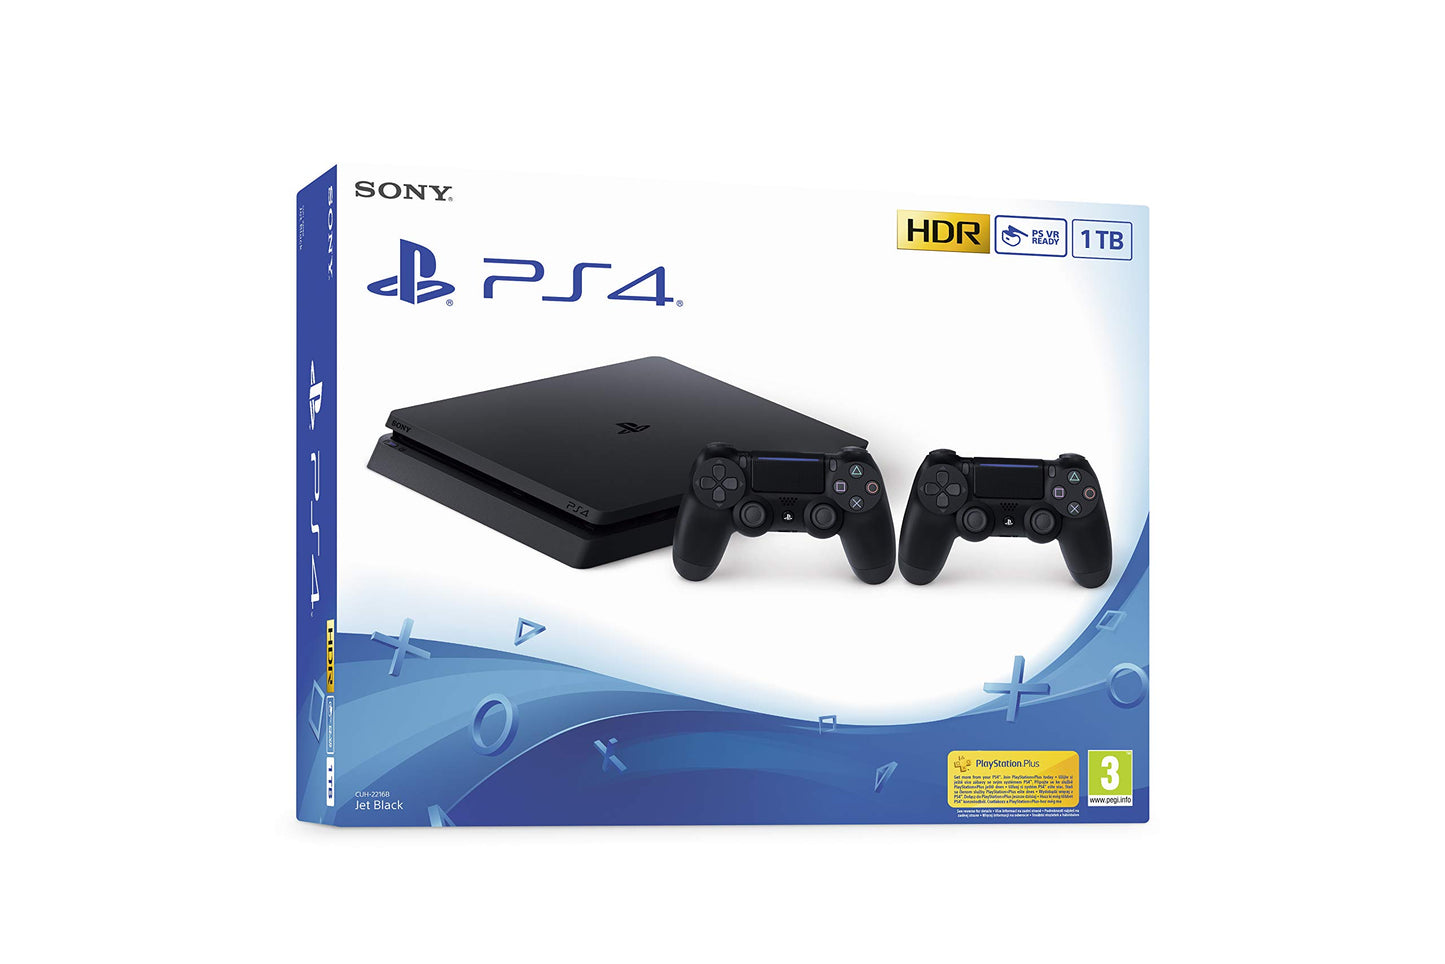 Sony Playstation 4 1TB Slim Game Console and DualShock v2 Controller